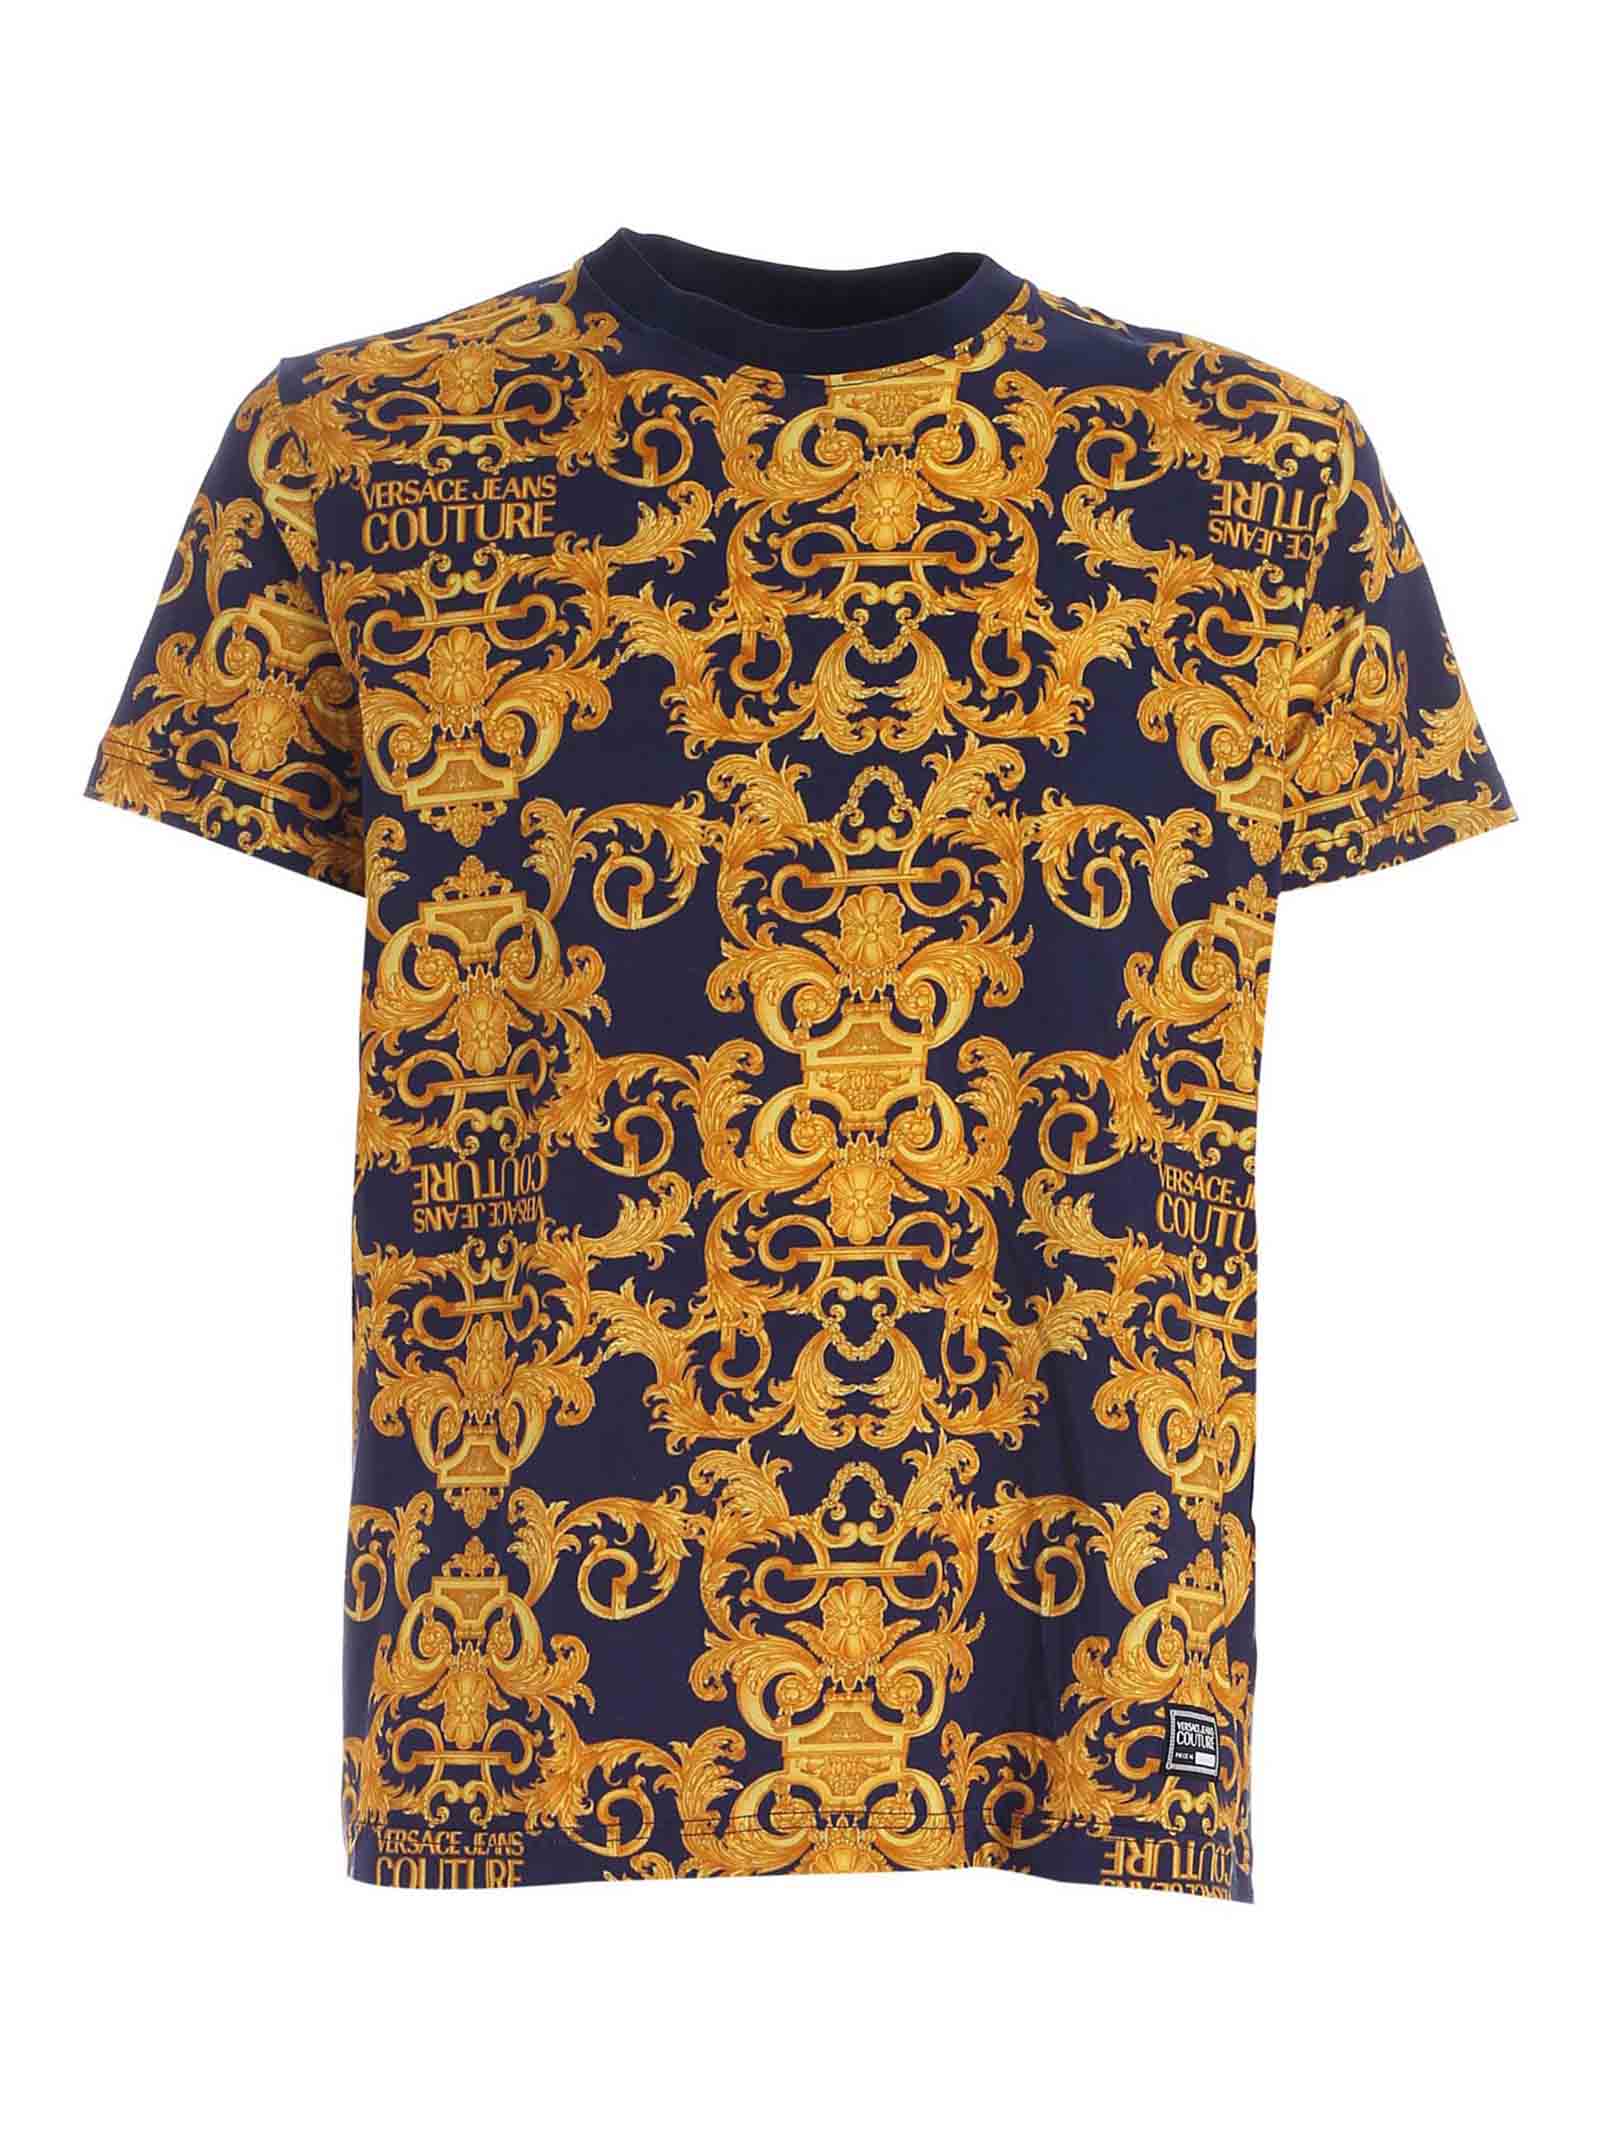 VERSACE JEANS COUTURE LOGO BAROQUE PRINT T-SHIRT IN BLUE,B3GWA7S0S0155200